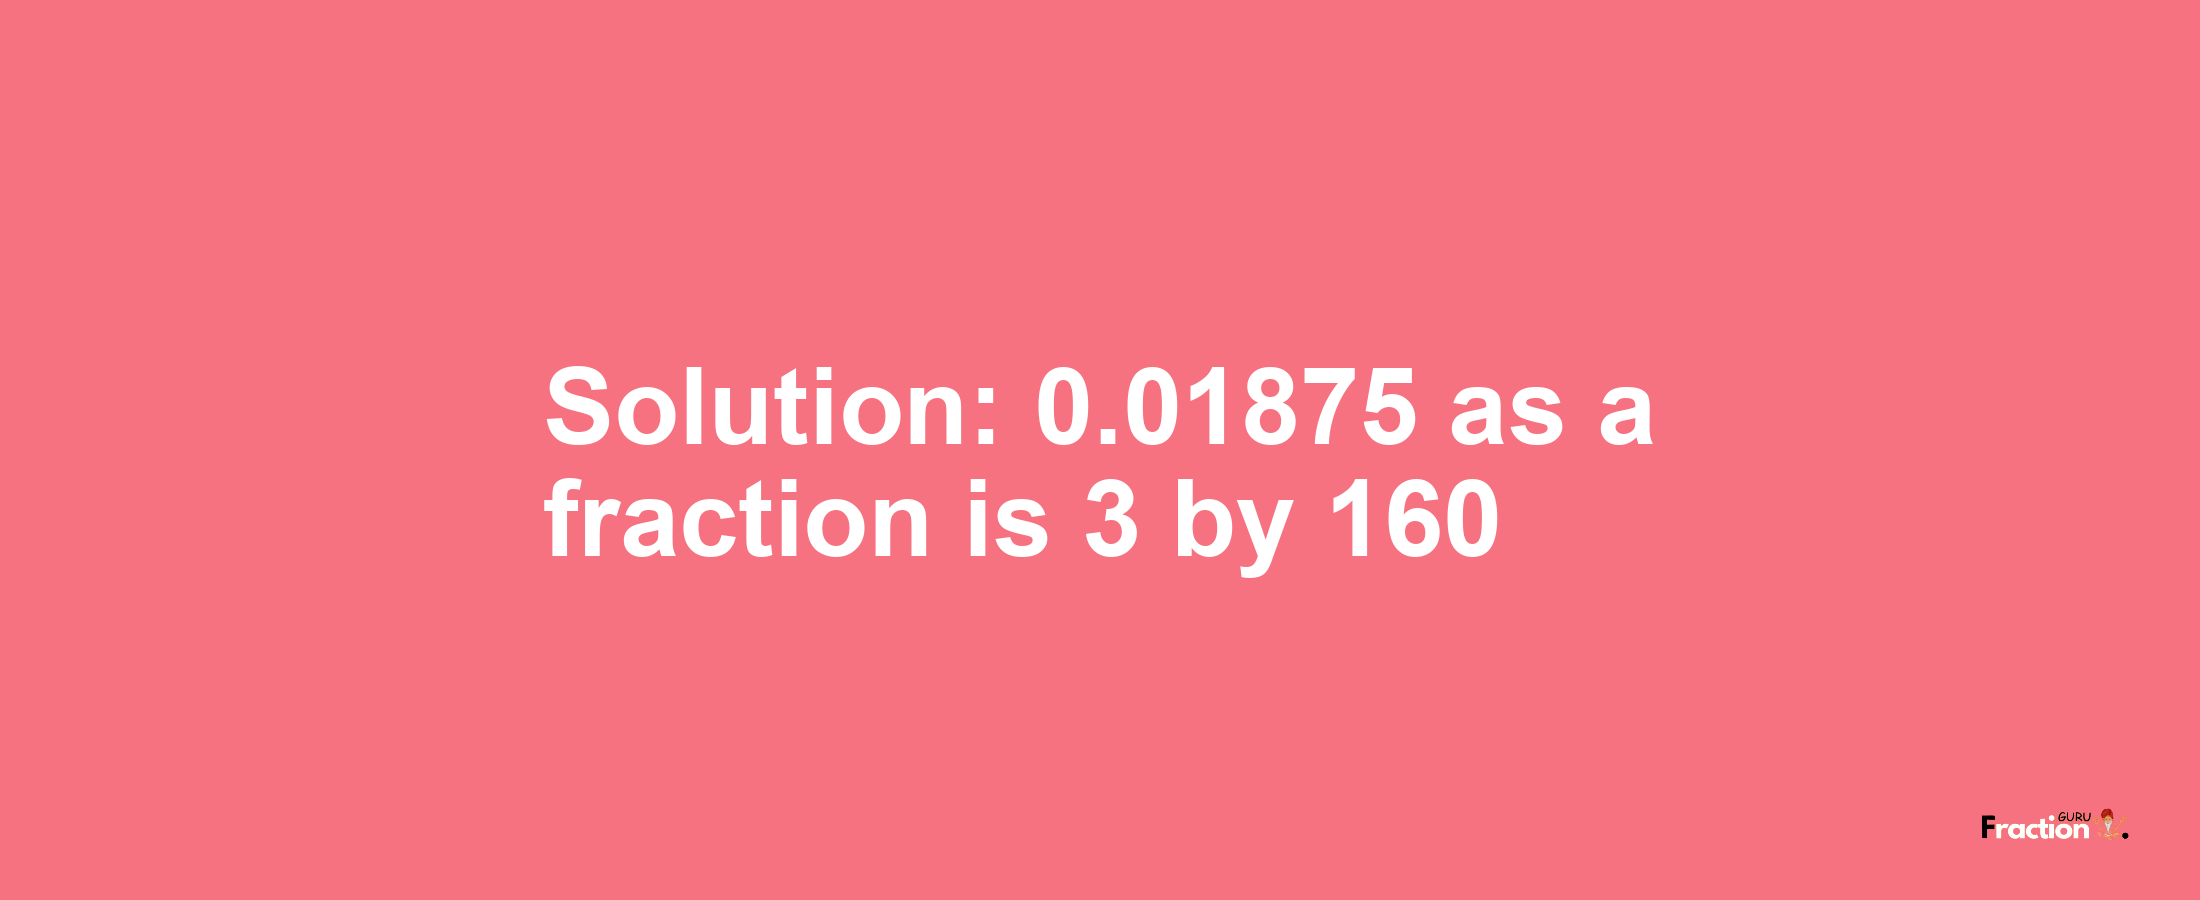 Solution:0.01875 as a fraction is 3/160